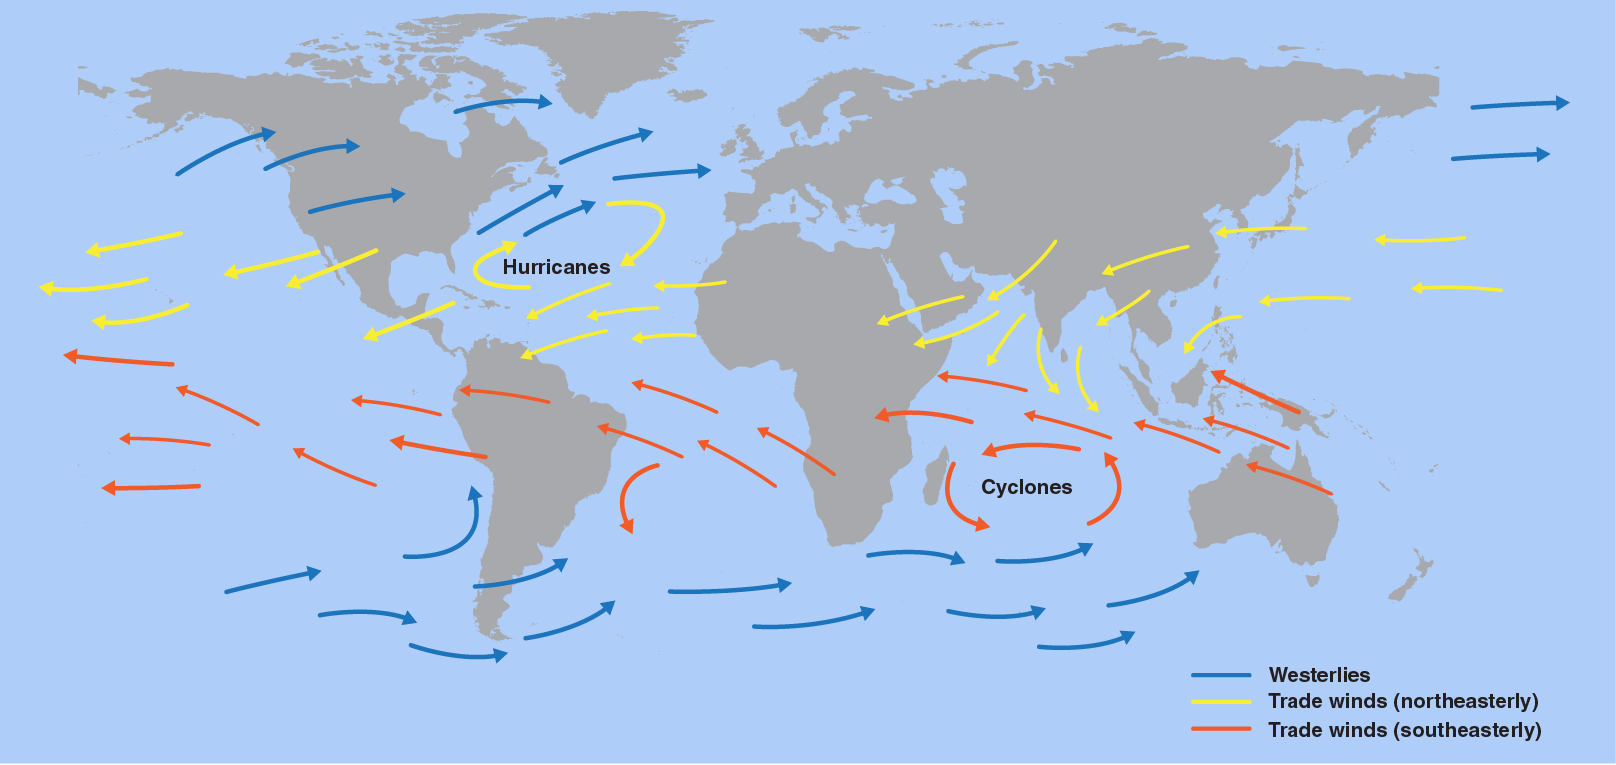 ocean-weather-anomaly-influence-global-trade-winds-analysis